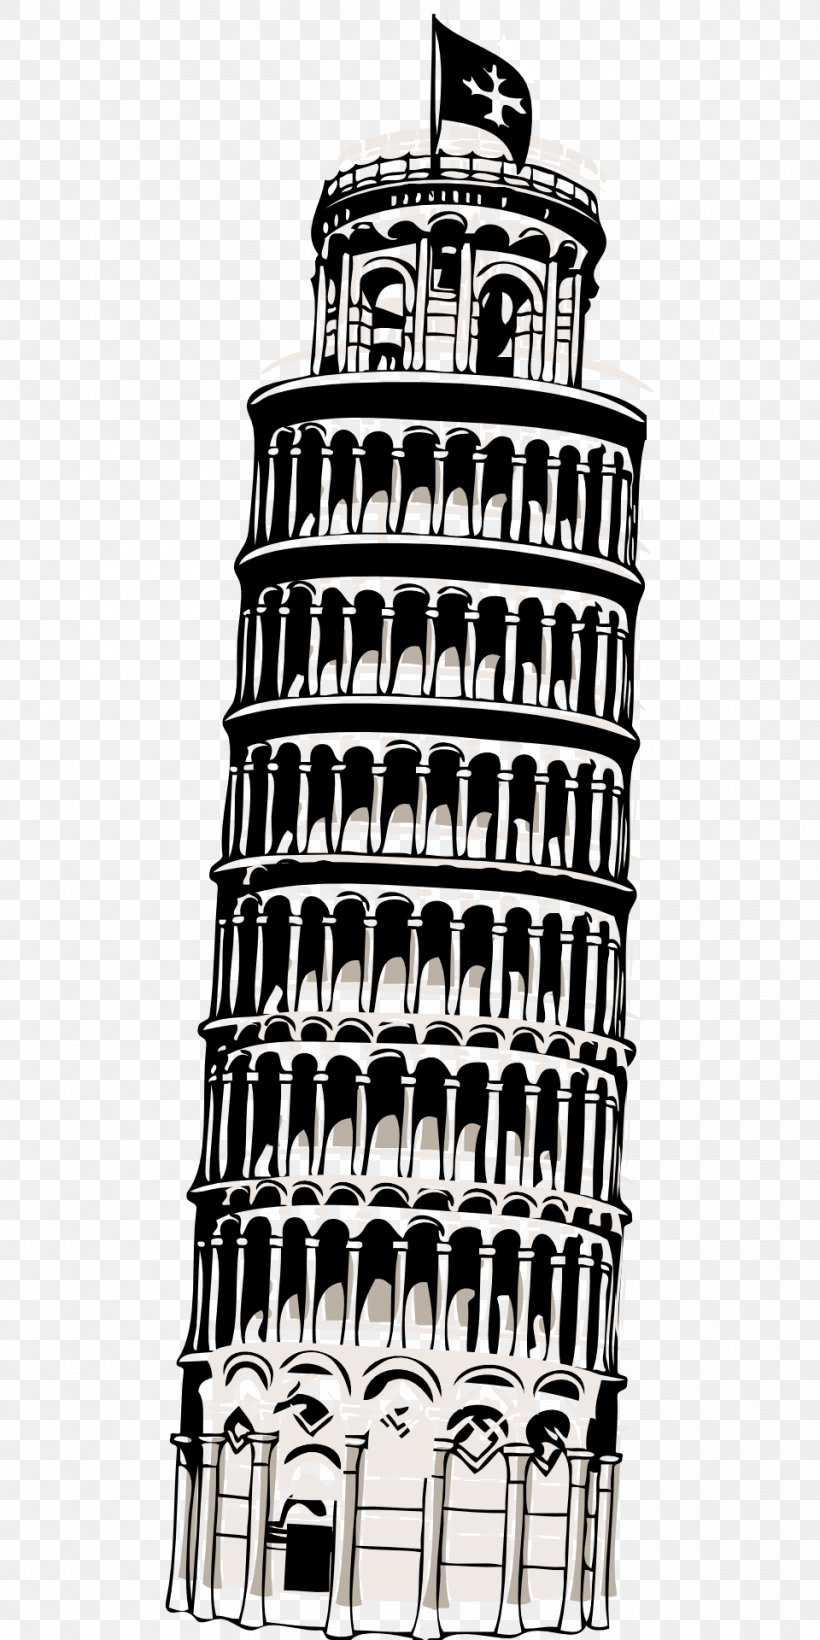 Leaning Tower Of Pisa Piazza Dei Miracoli Eiffel Tower Clip Art, PNG, 960x1920px, Leaning Tower Of Pisa, Black And White, Building, Classical Architecture, Eiffel Tower Download Free